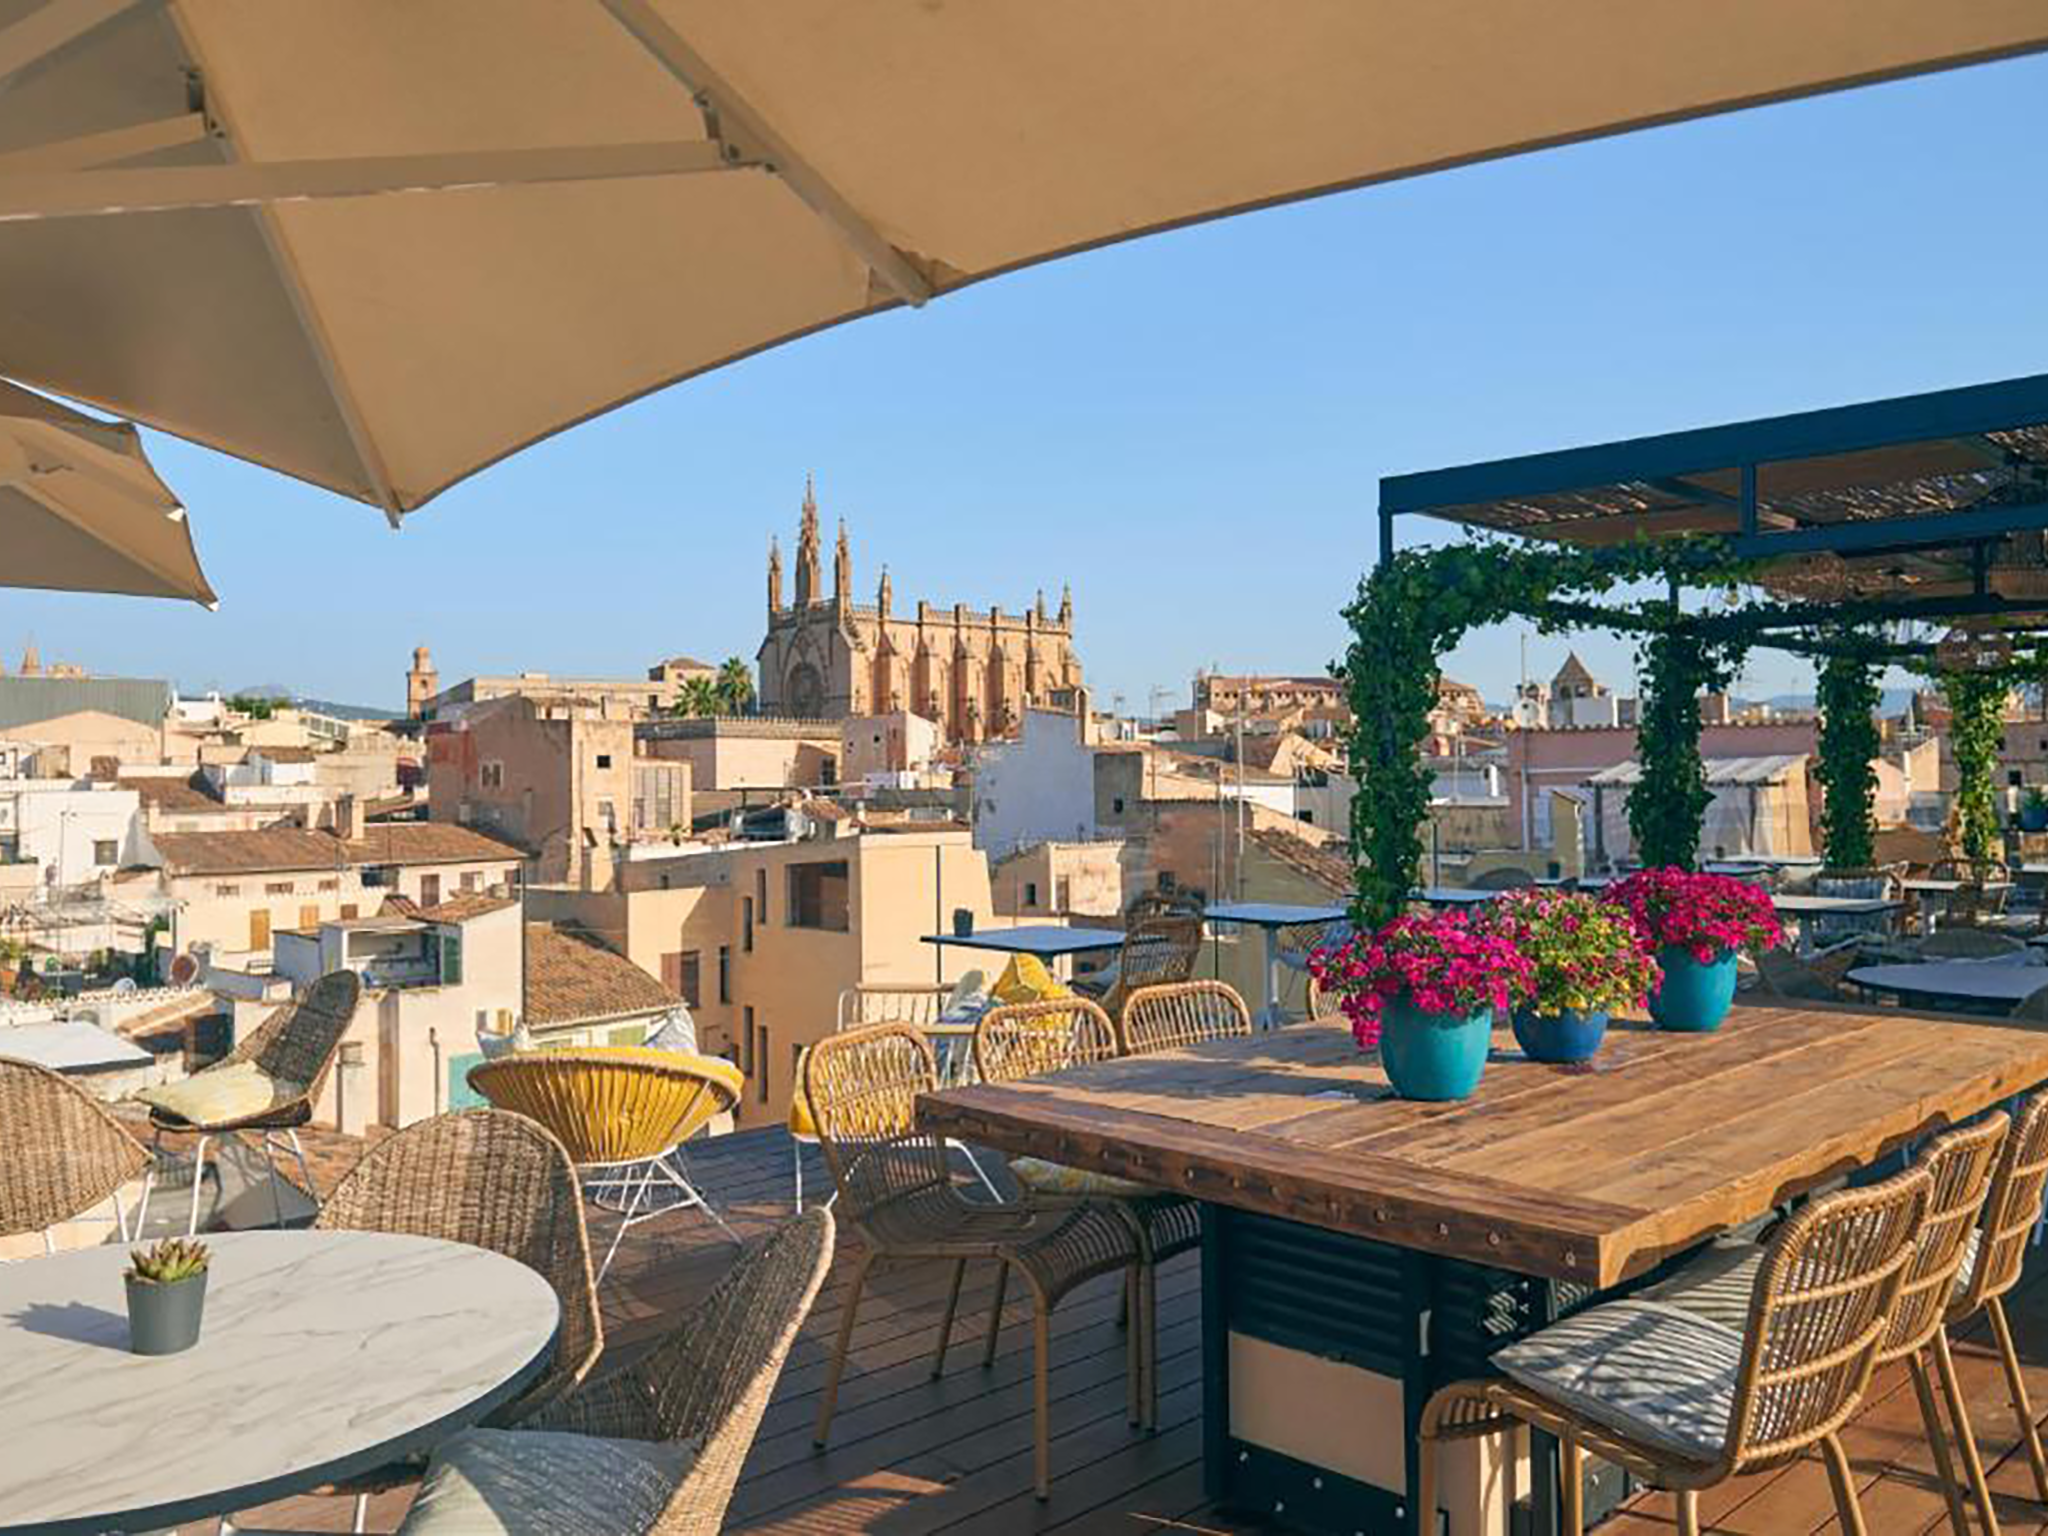 The rooftop terrace has stunning views of the city, and hosts a large infinity pool